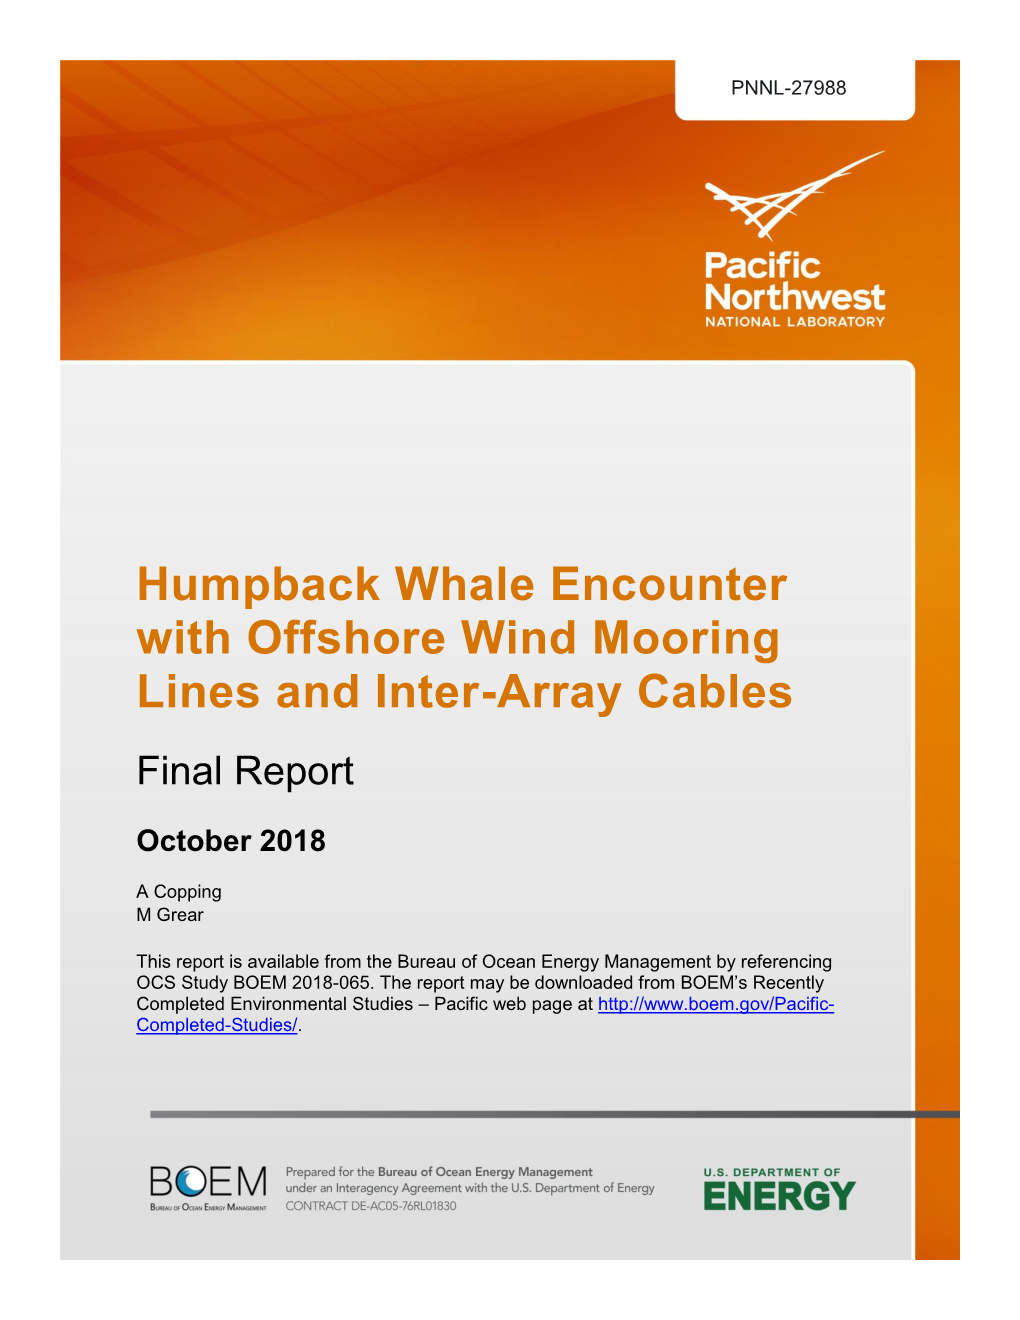 Humpback Whale Encounter with Offshore Wind Mooring Lines and Inter-Array Cables Final Report